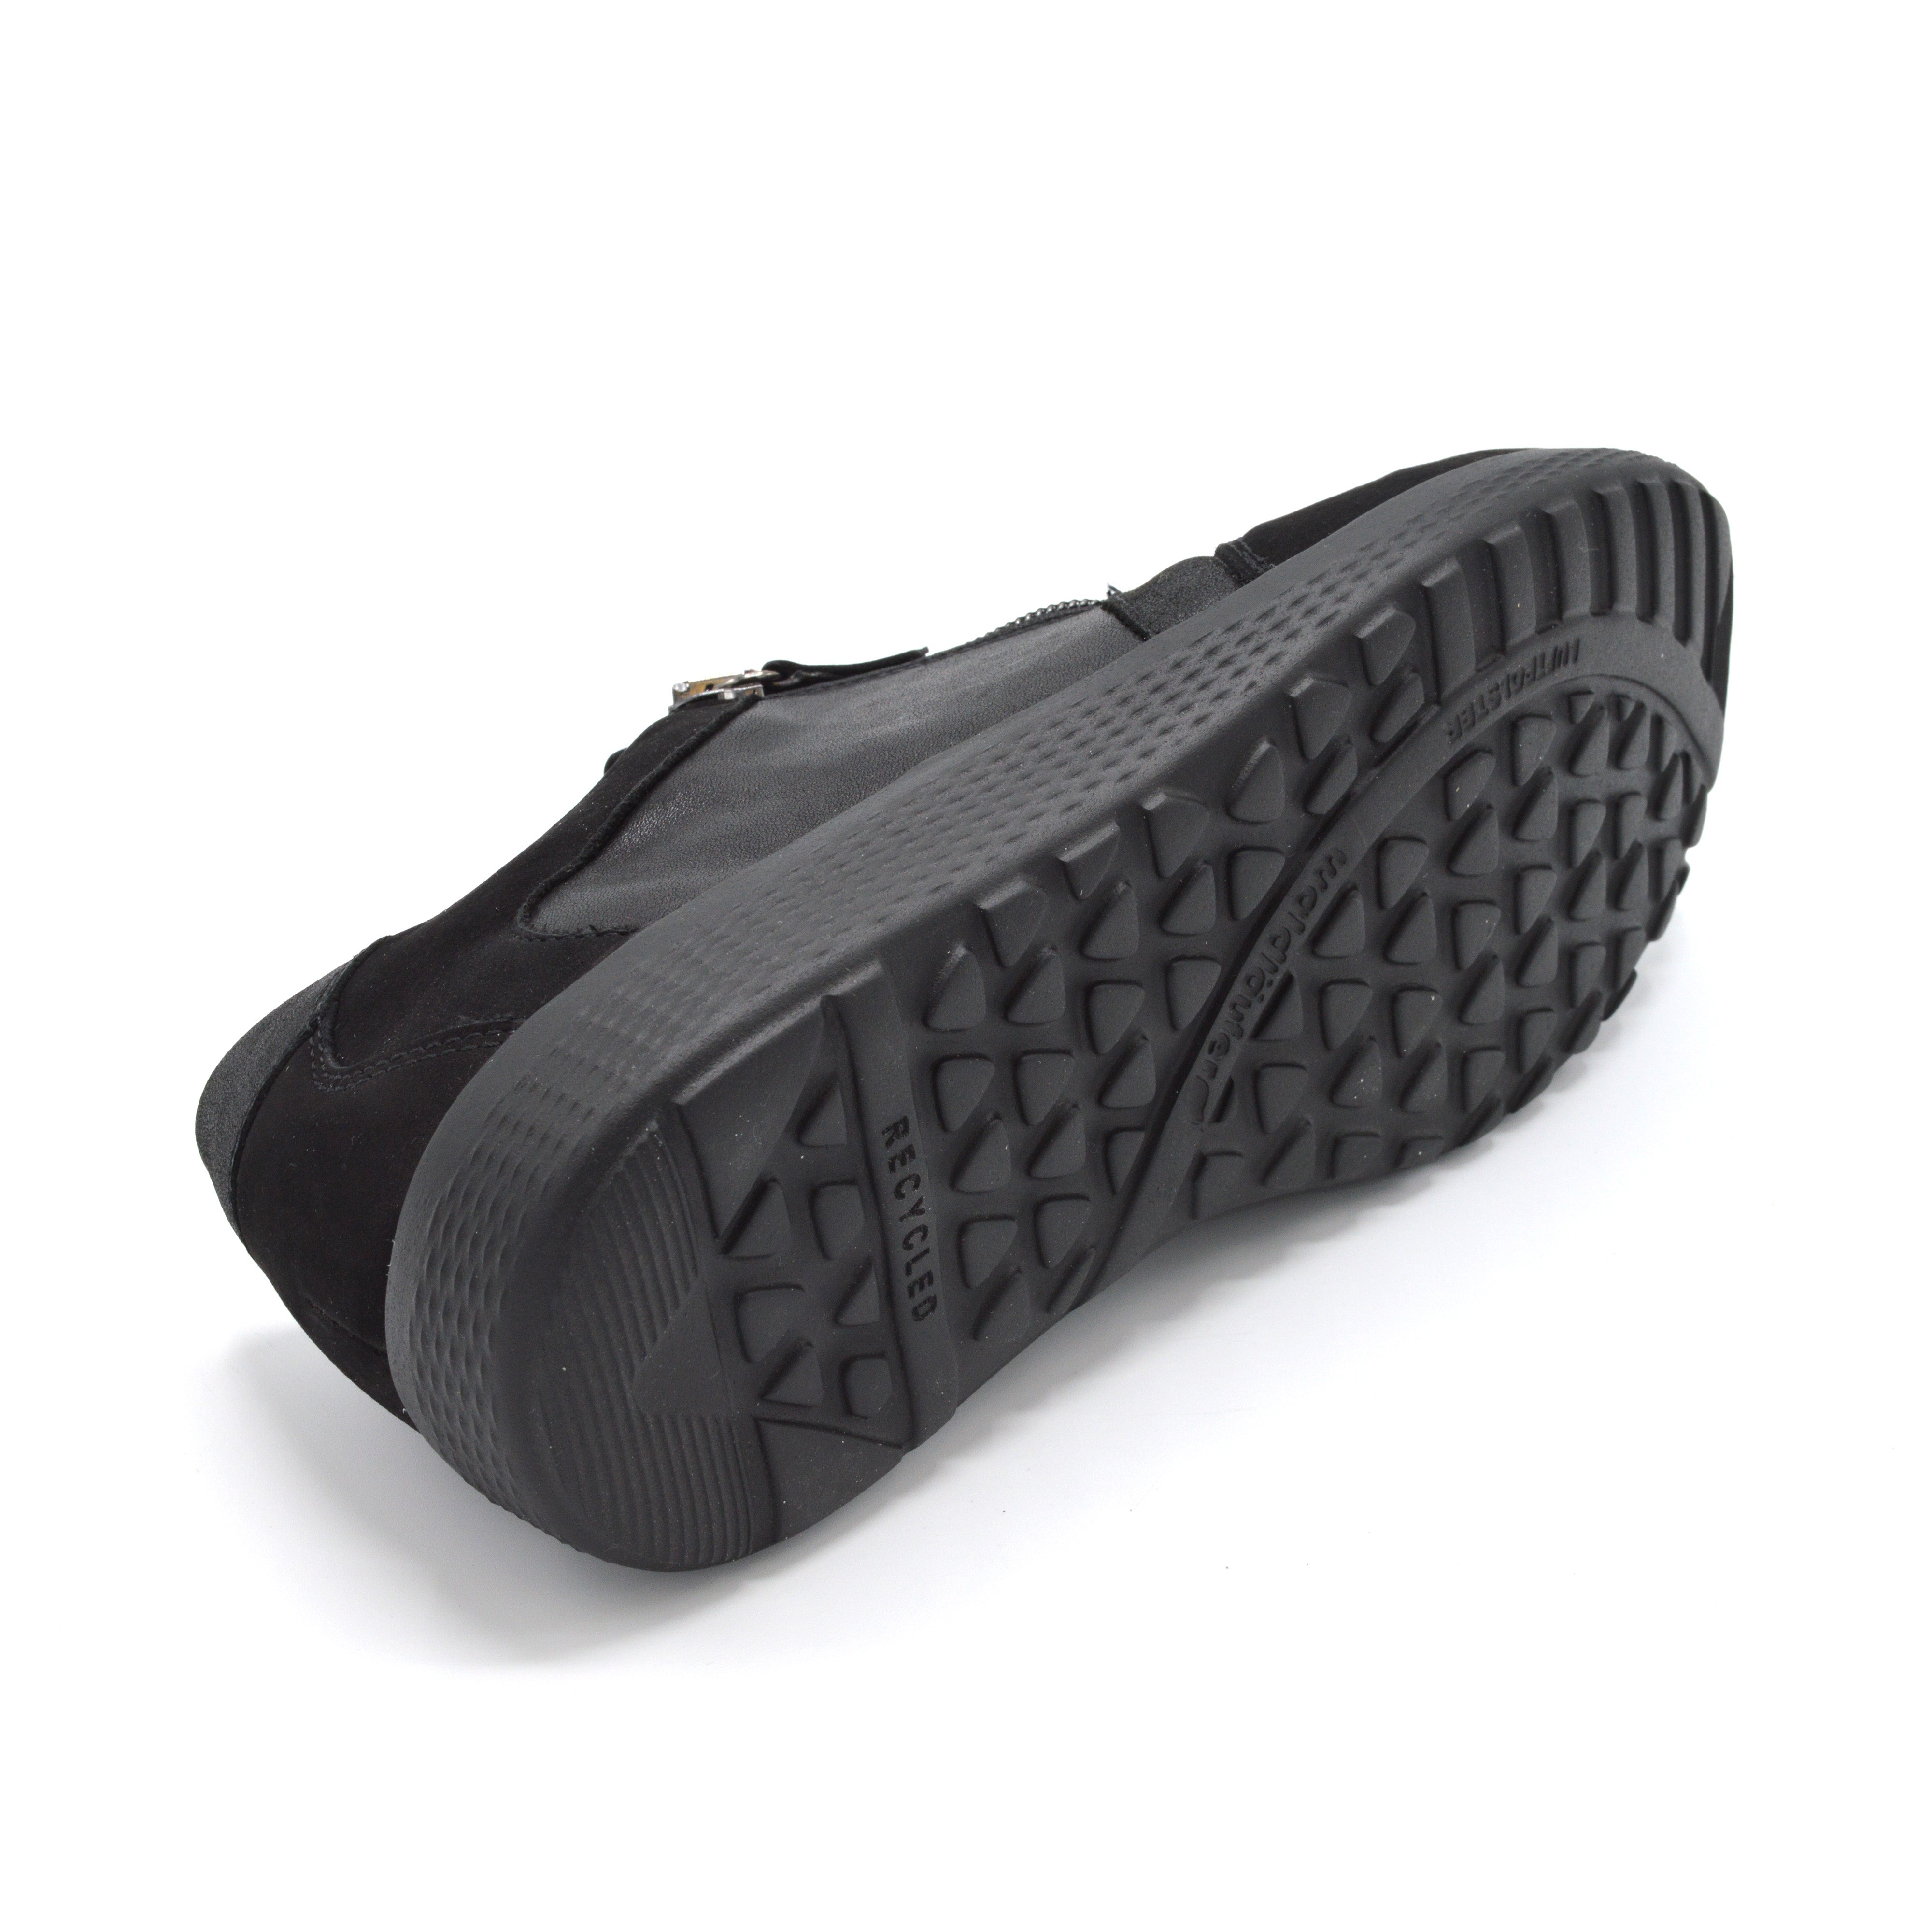 Extra Wide Fitting Zipped Trainer For Orthotics